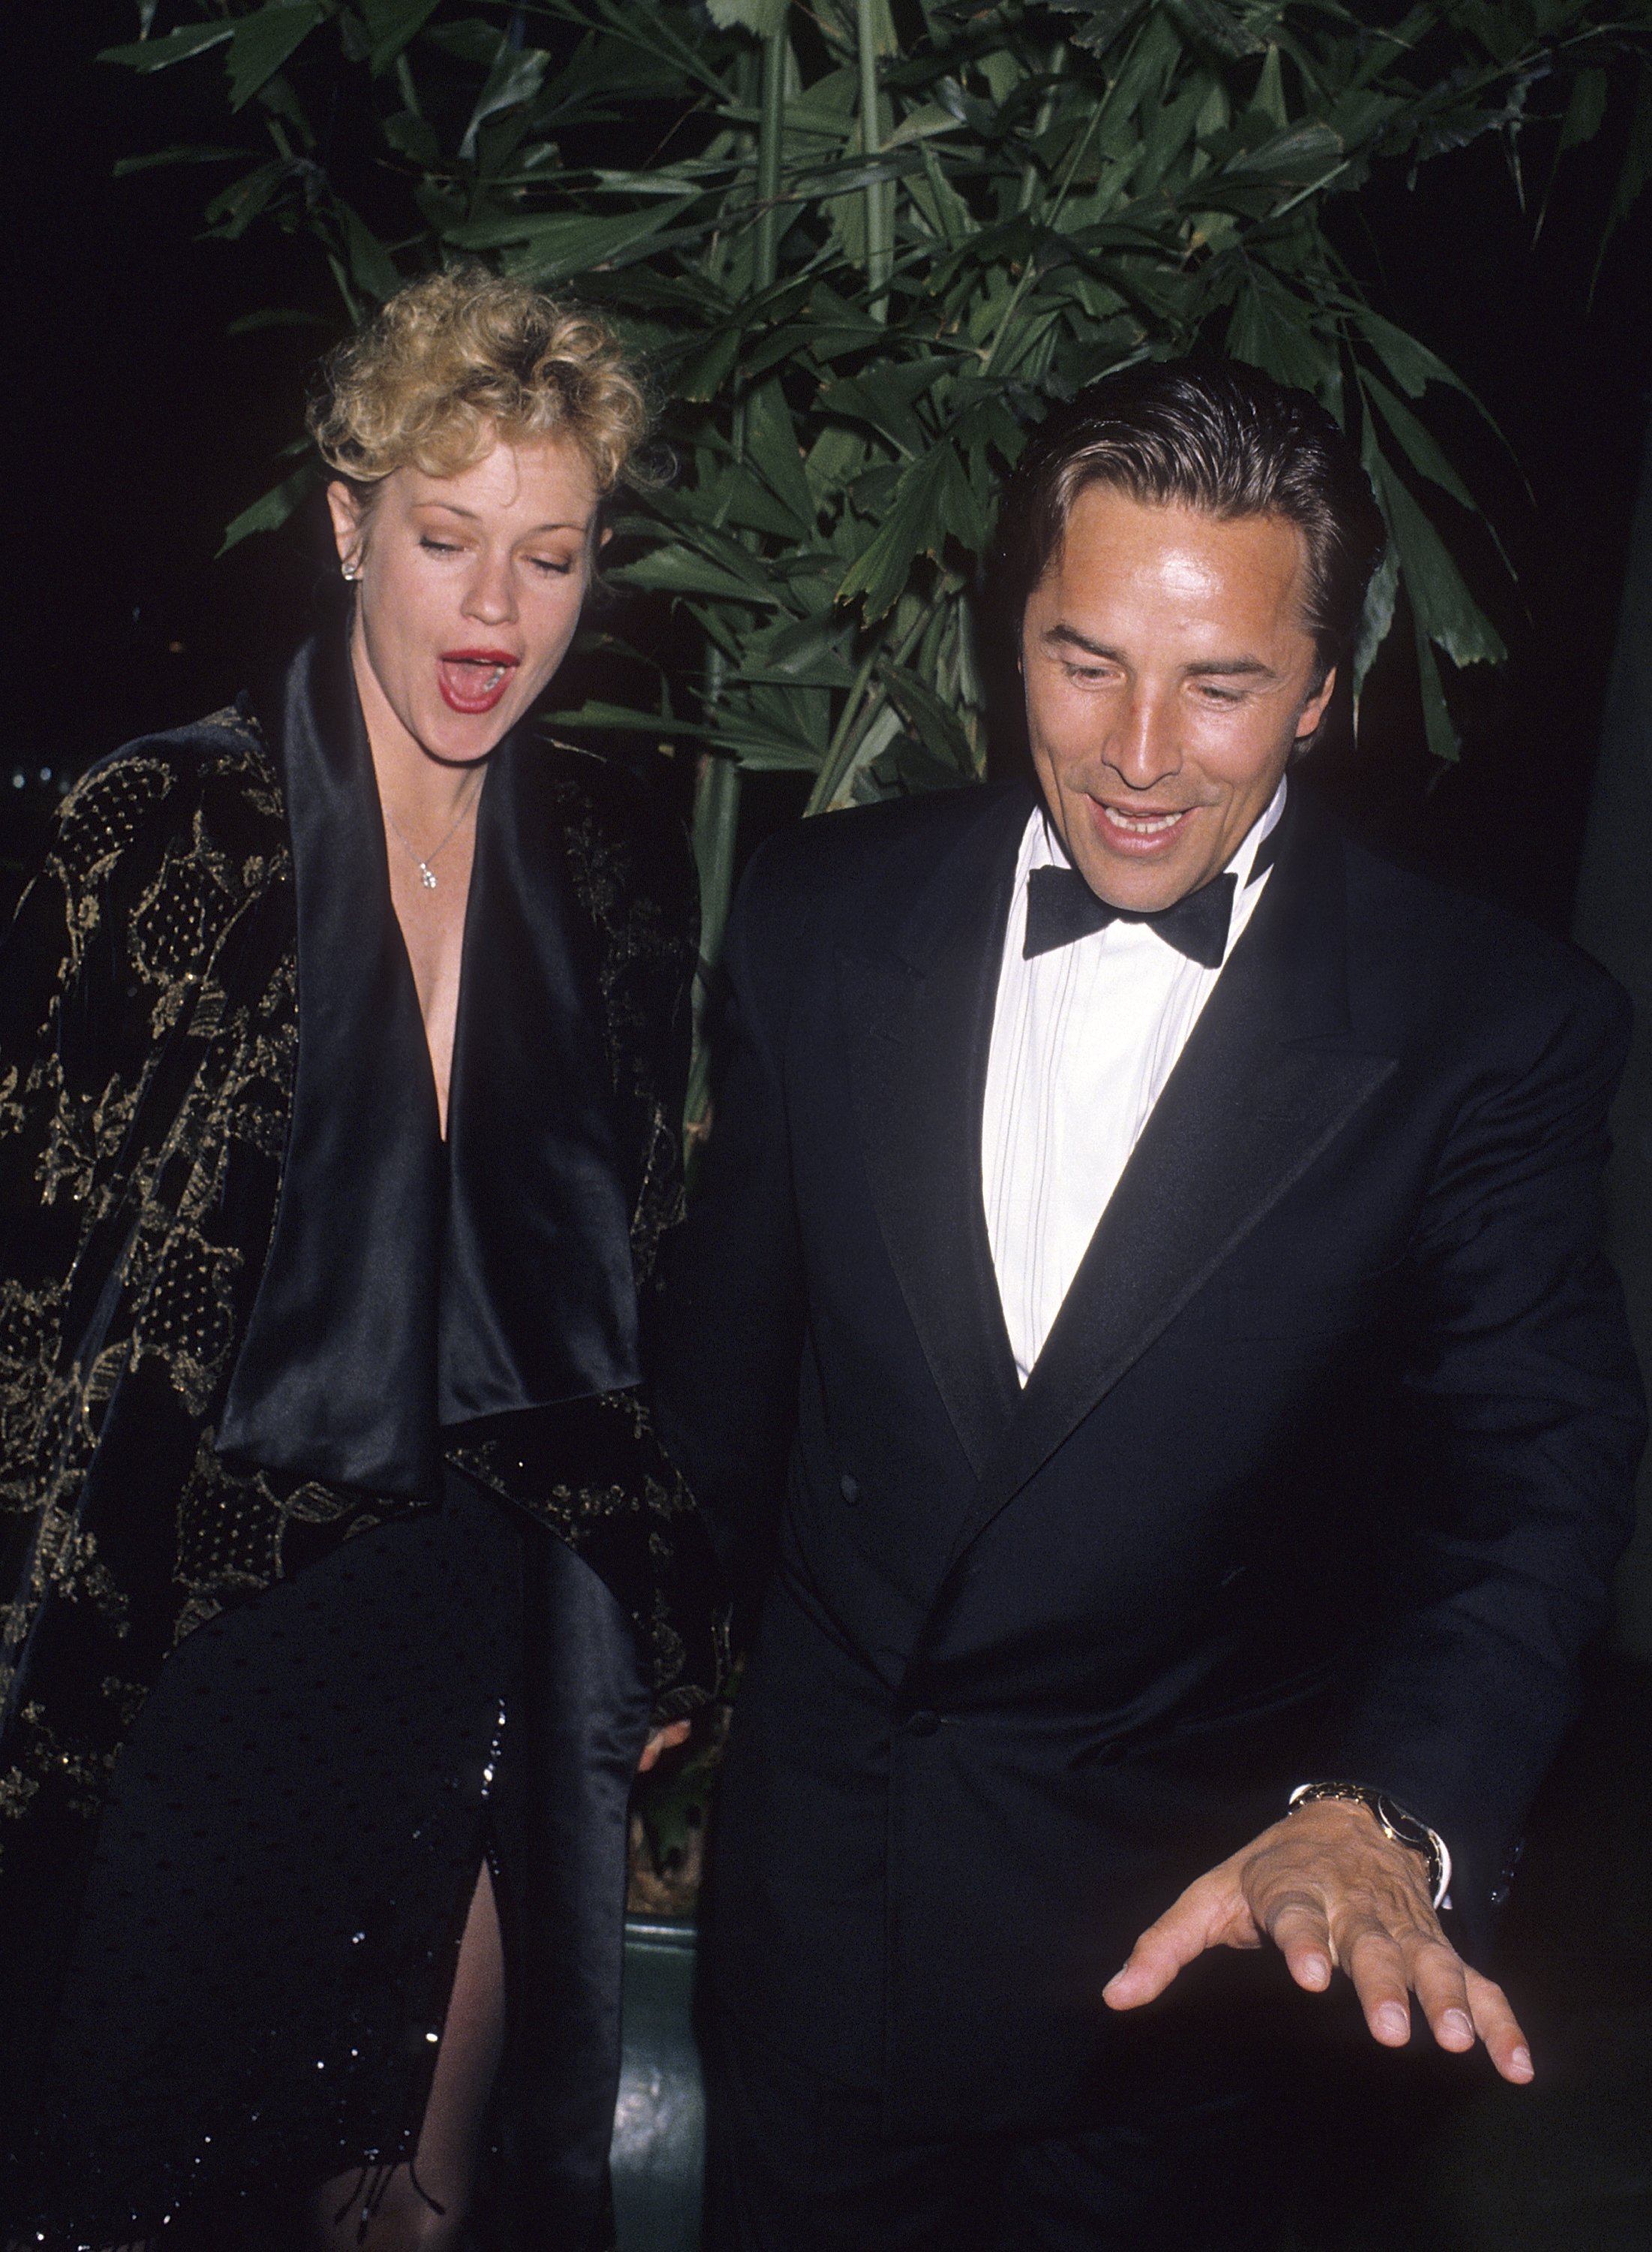 Melanie Griffith and Don Johnson pictured the First Annual Fire & Ice Ball to Benefit Revlon/UCLA Women's Cancer Research Program in 1990. | Photo: Getty Images